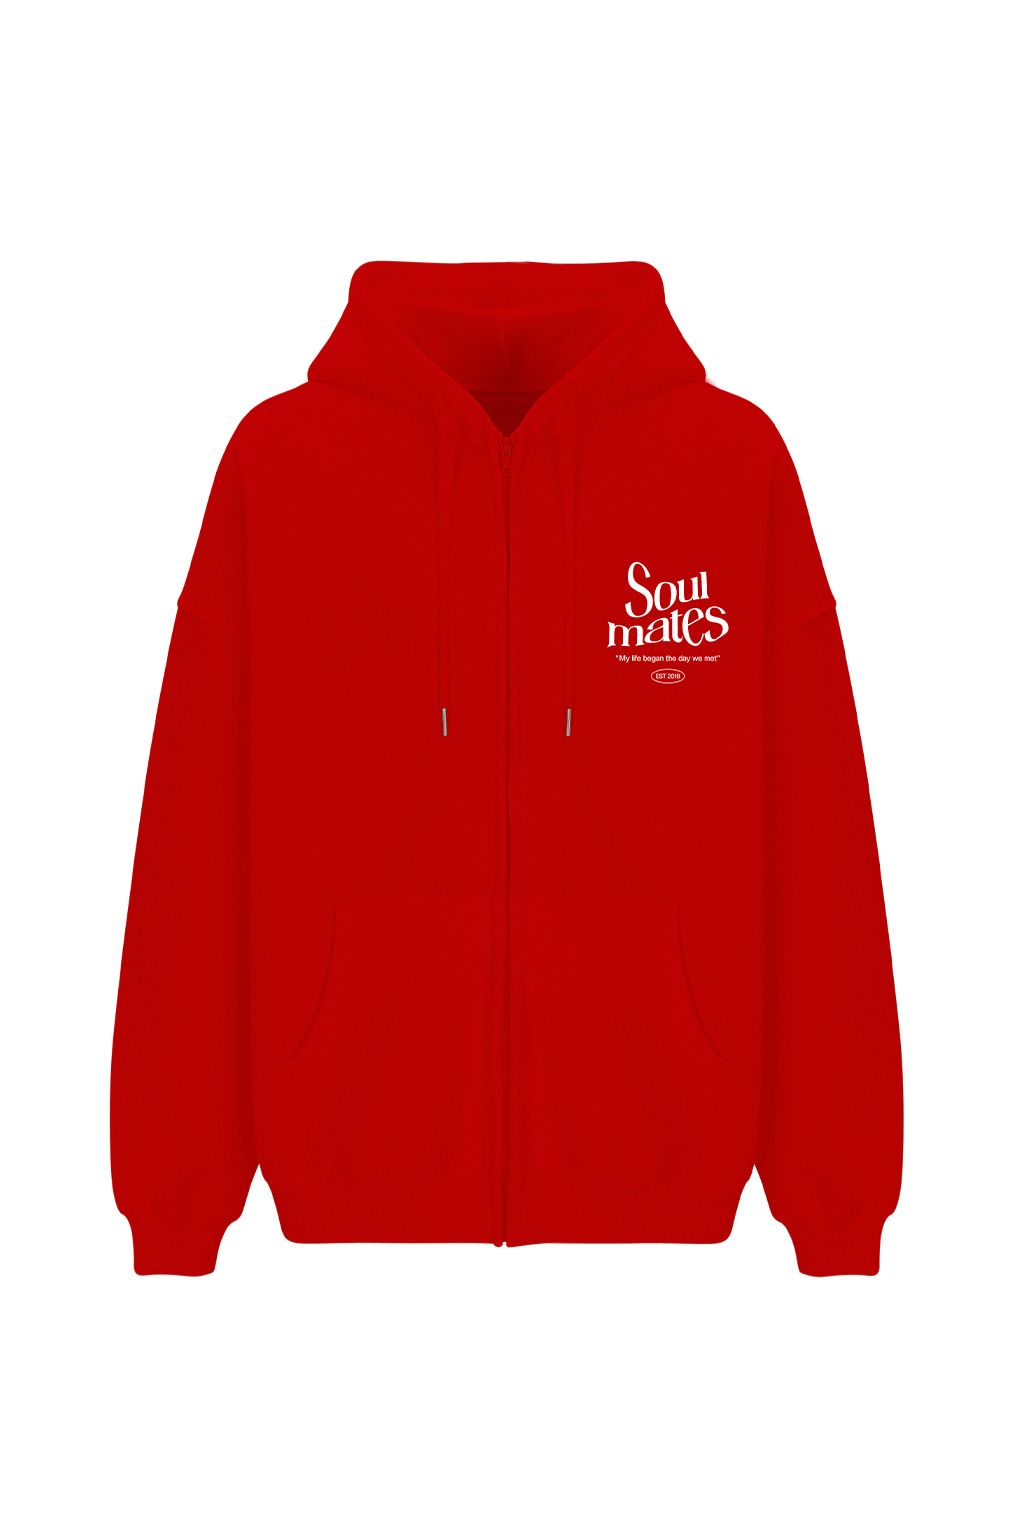 [For men and women] Soulmate Fleece-Lined Hooded Zip-Up Red